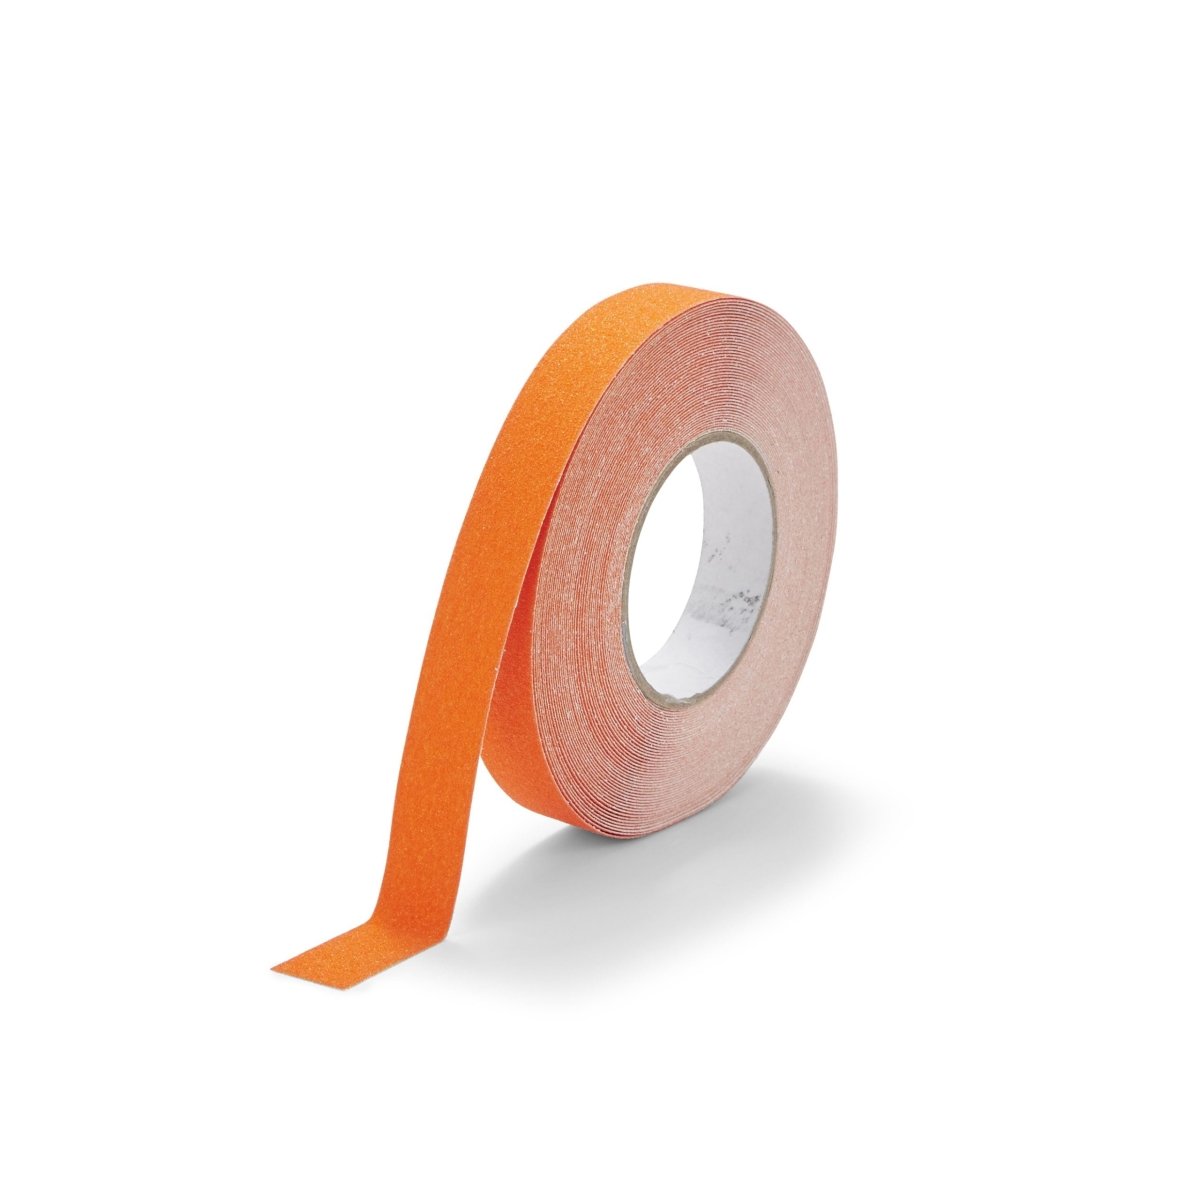 Conformable Traction Grade Anti Slip Tape Rolls - Slips Away - Conformable Anti-Slip Tape - H3406O-Conformable-Safety-Grip-Orange-25mm-1 -